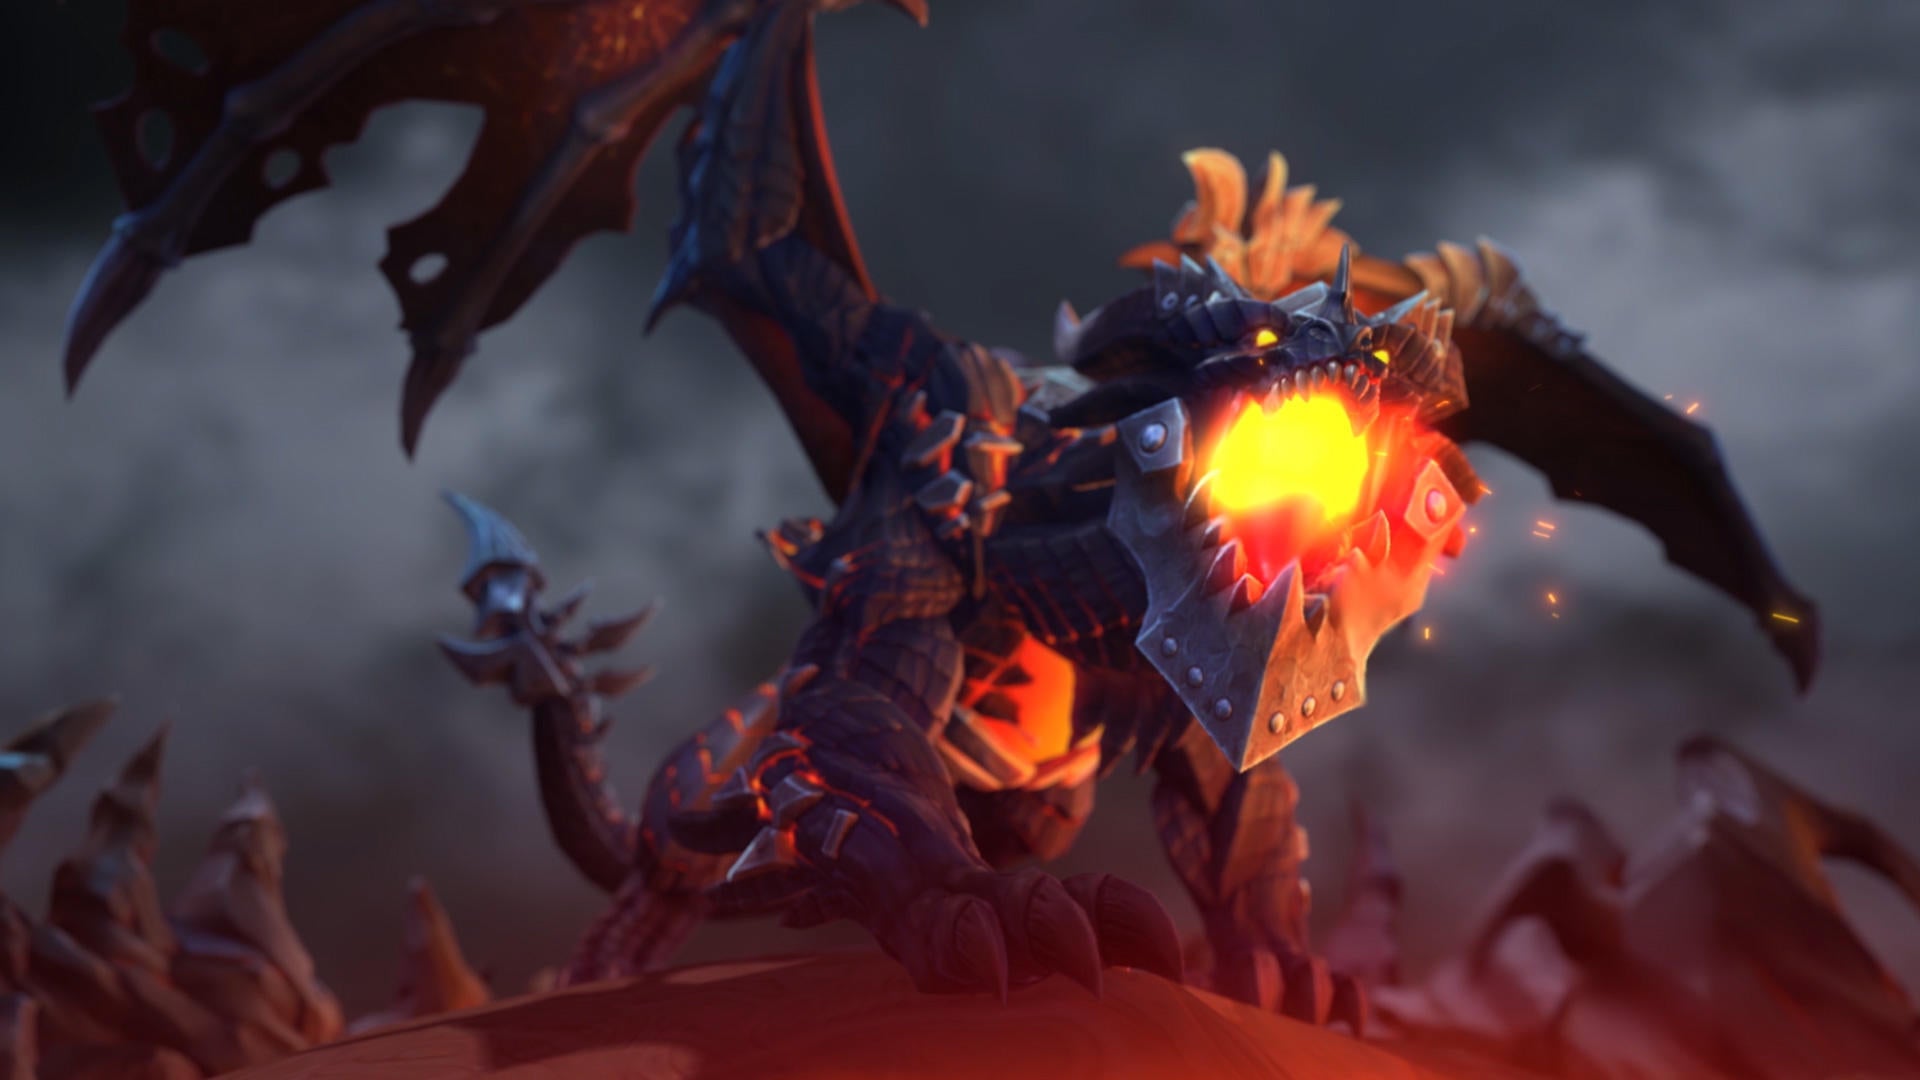 Heroes of the Storm Gets First Major Update in Nearly Two Years